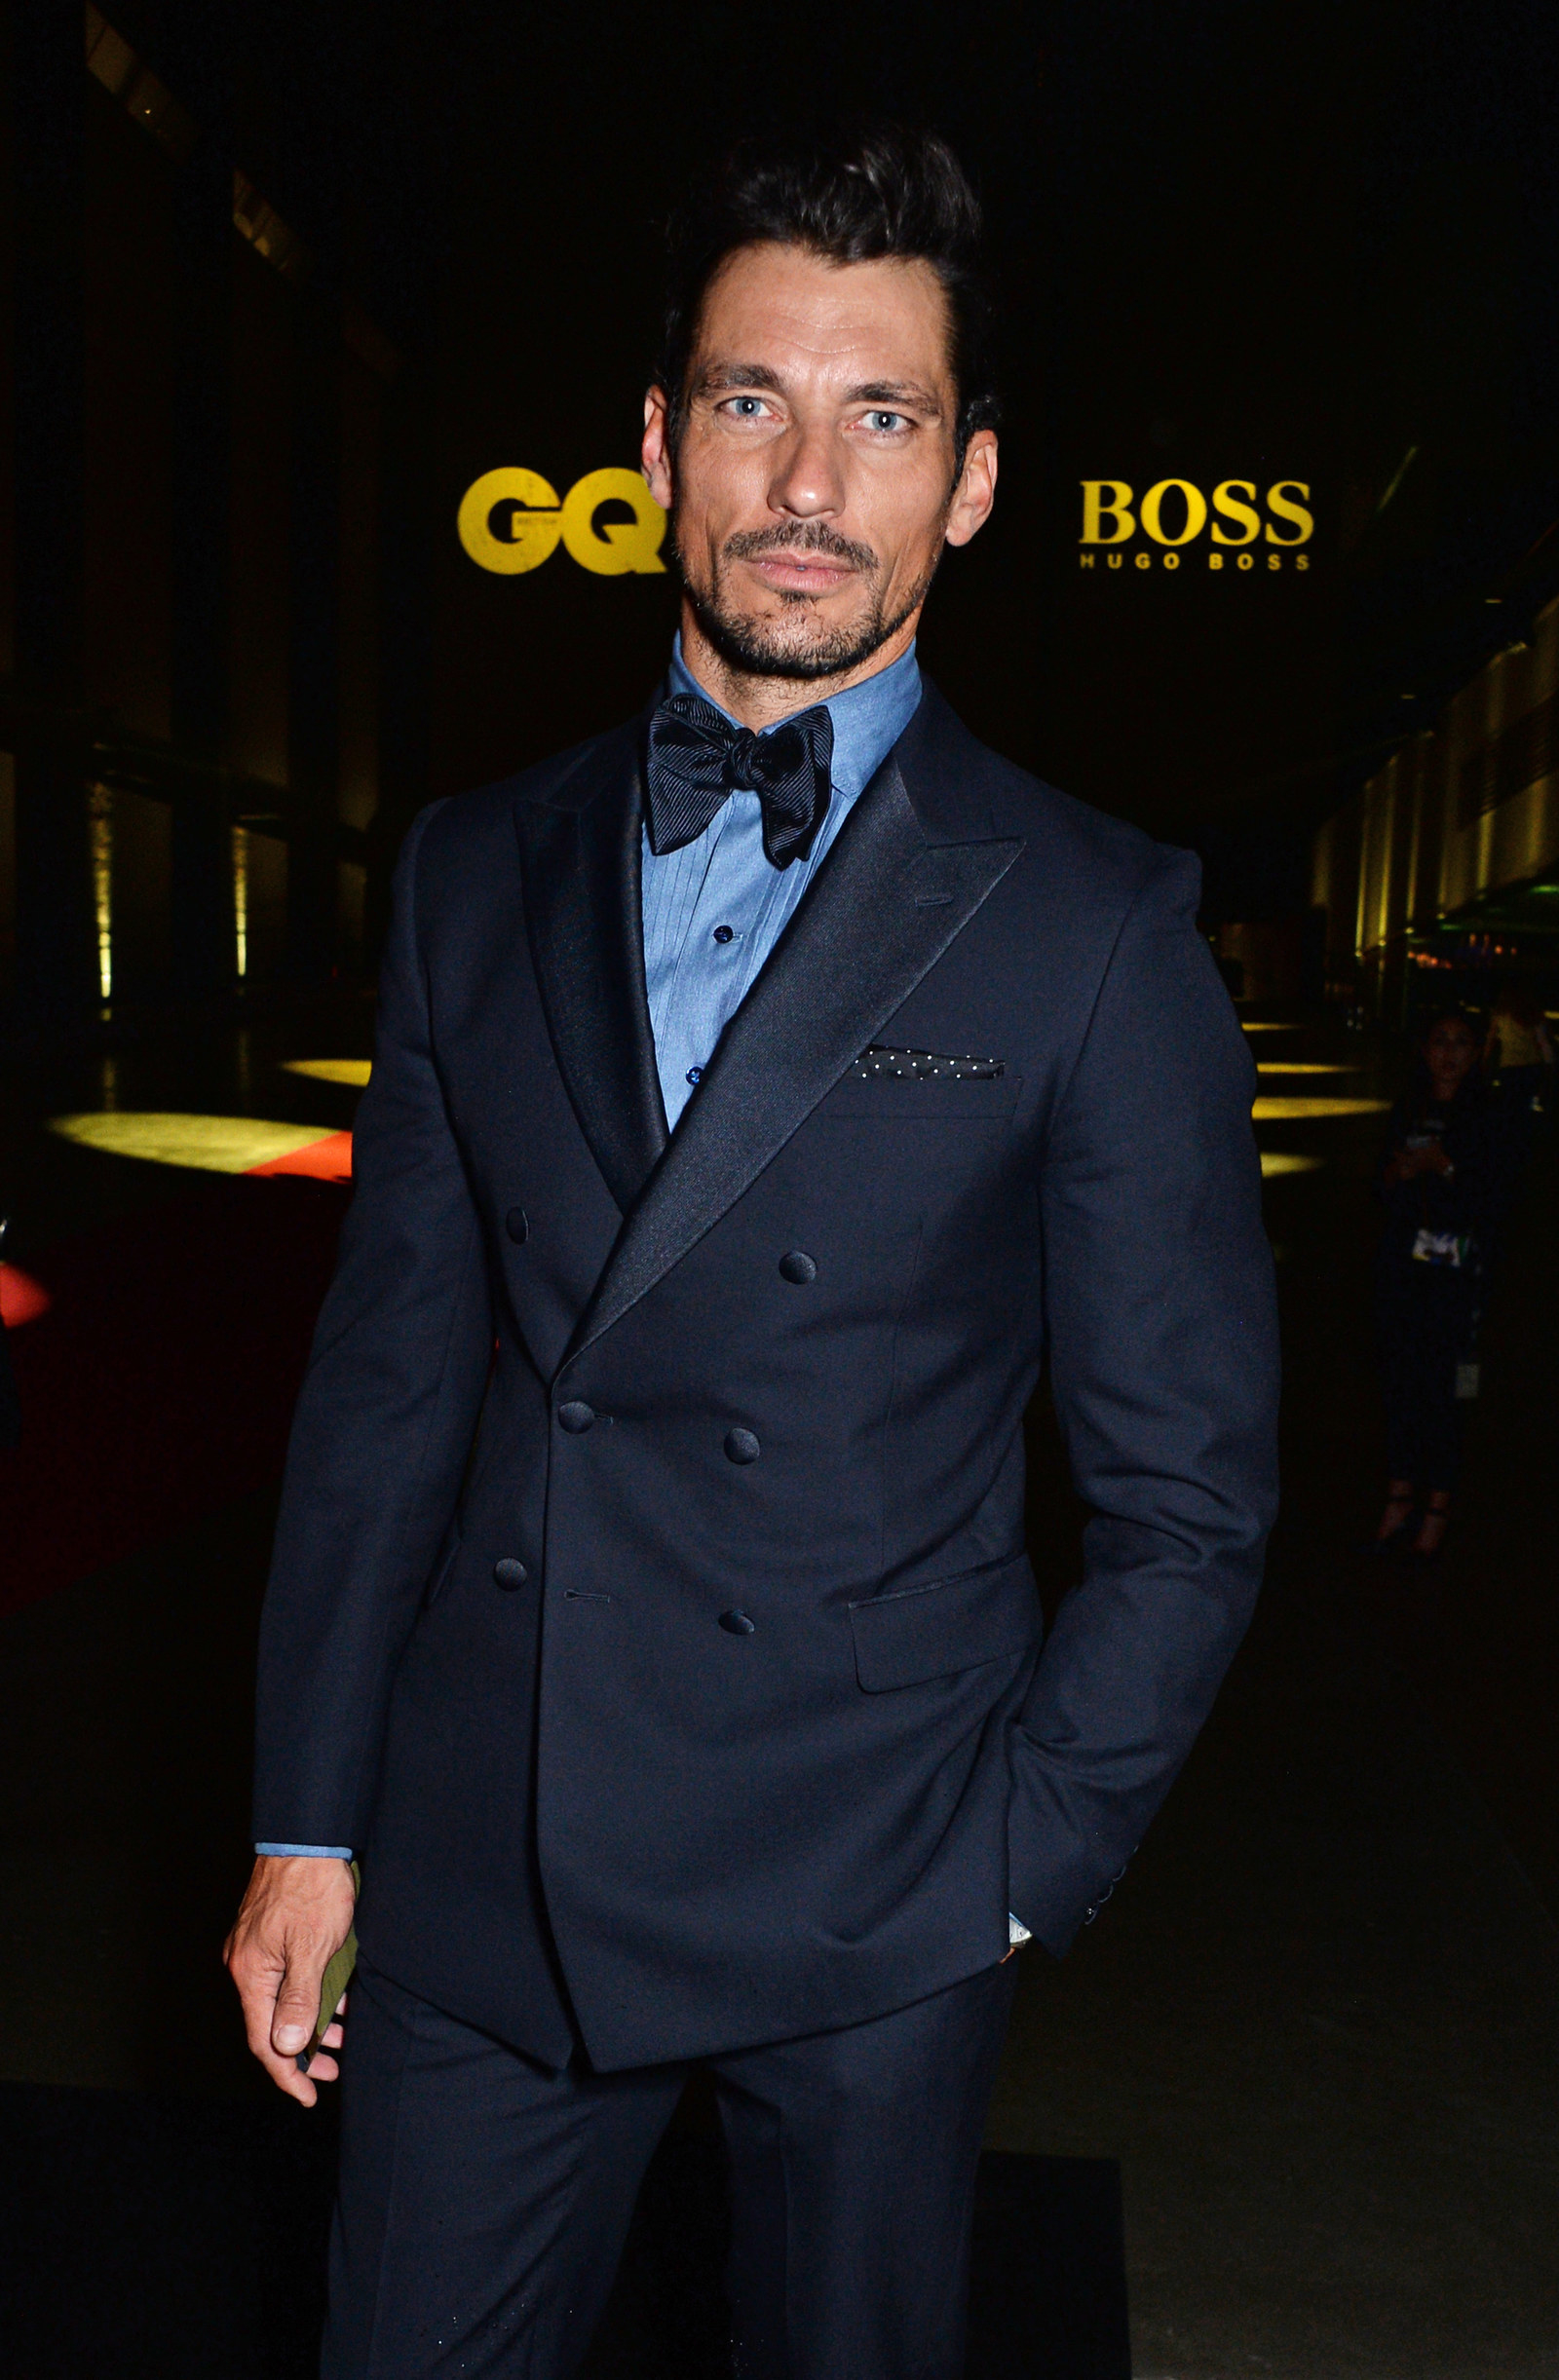 Here Are All The Pictures You Need To See From The GQ Men Of The Year ...